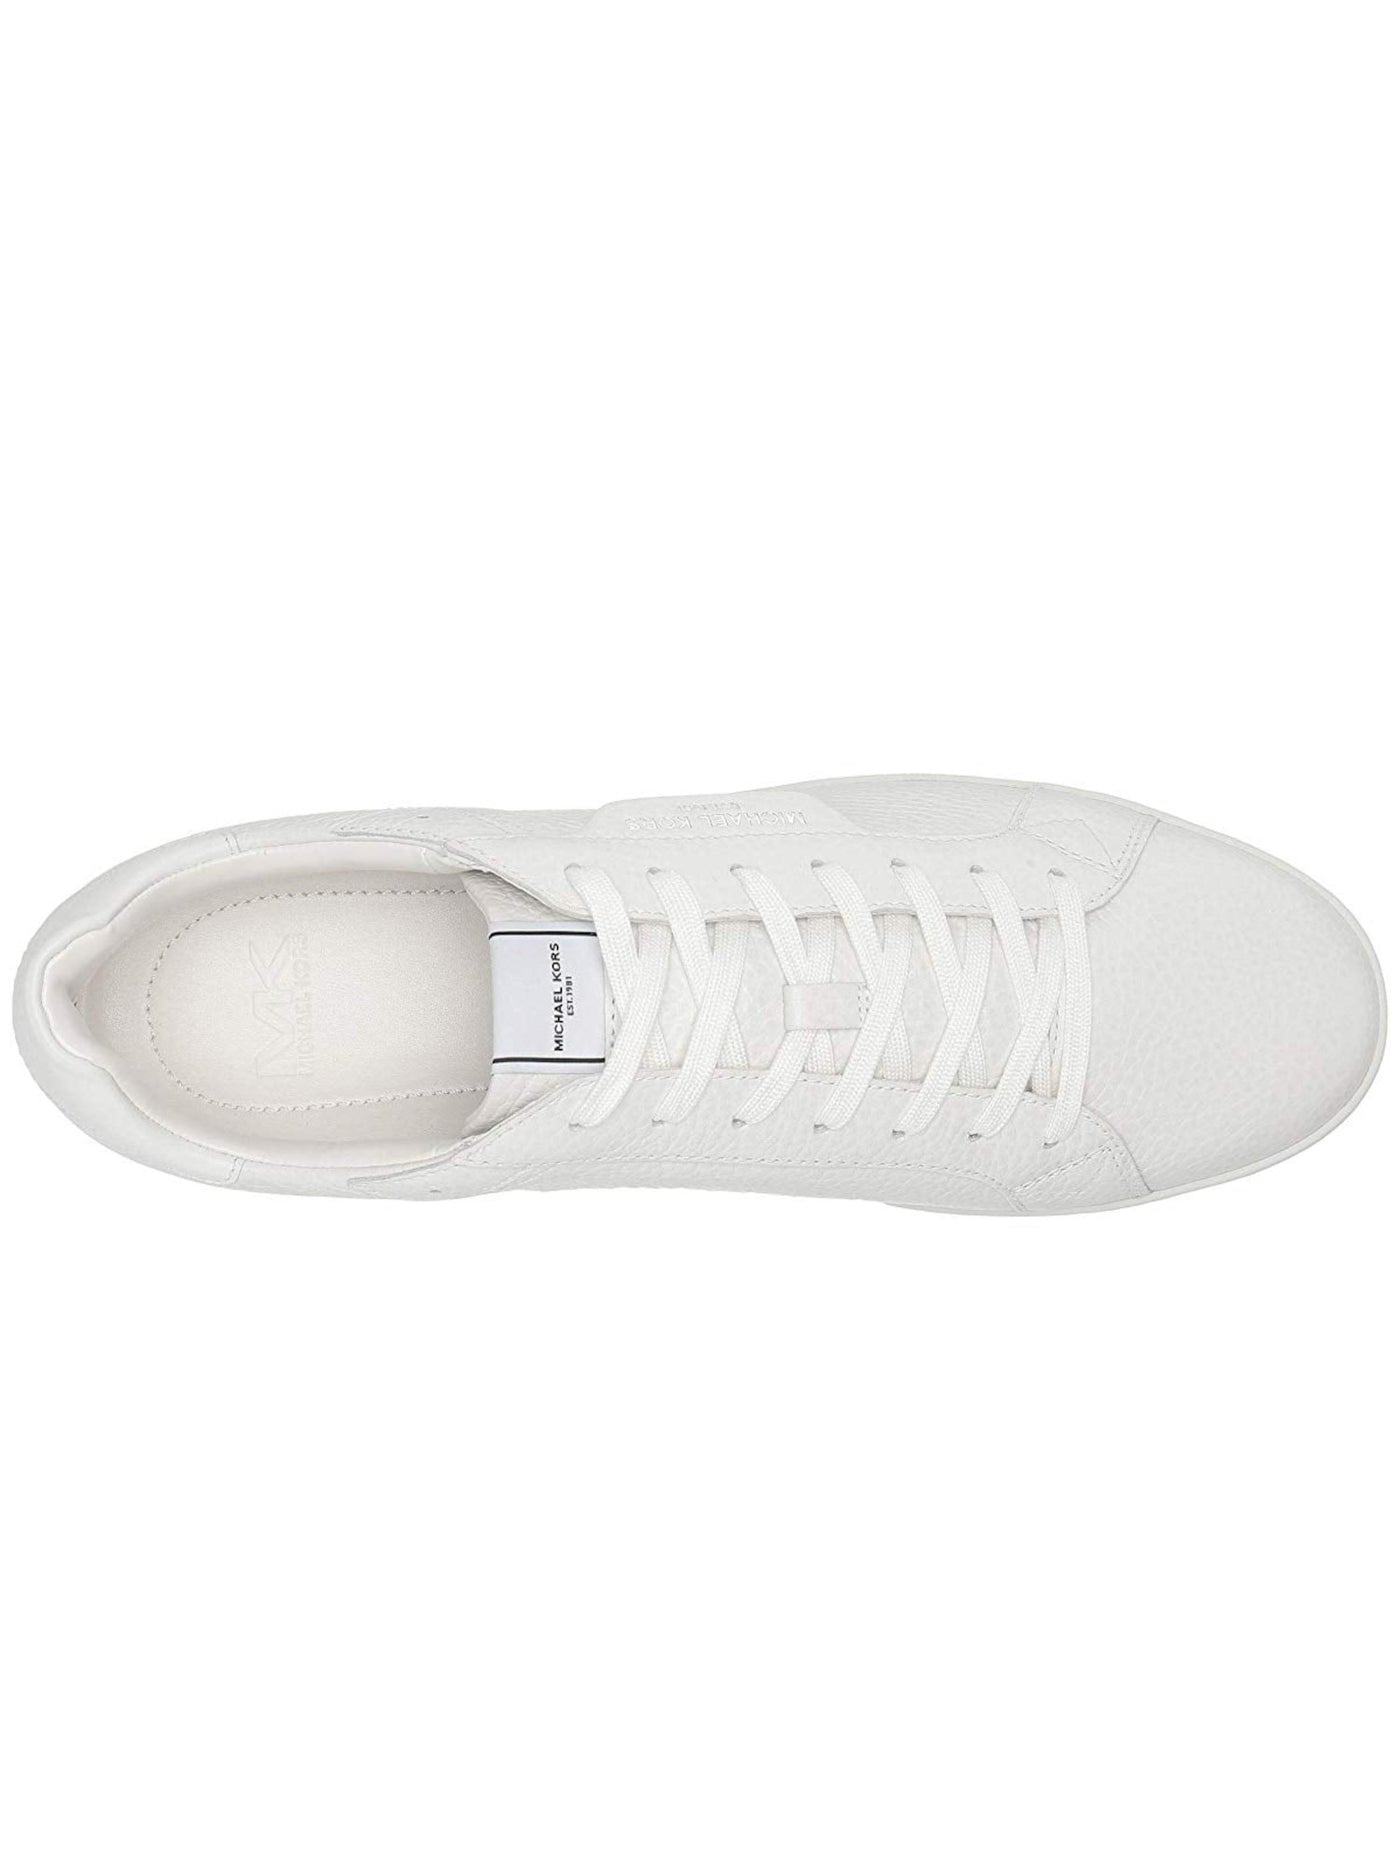 MICHAEL KORS Mens White Padded Keating Round Toe Wedge Lace-Up Leather Sneakers Shoes 12 M